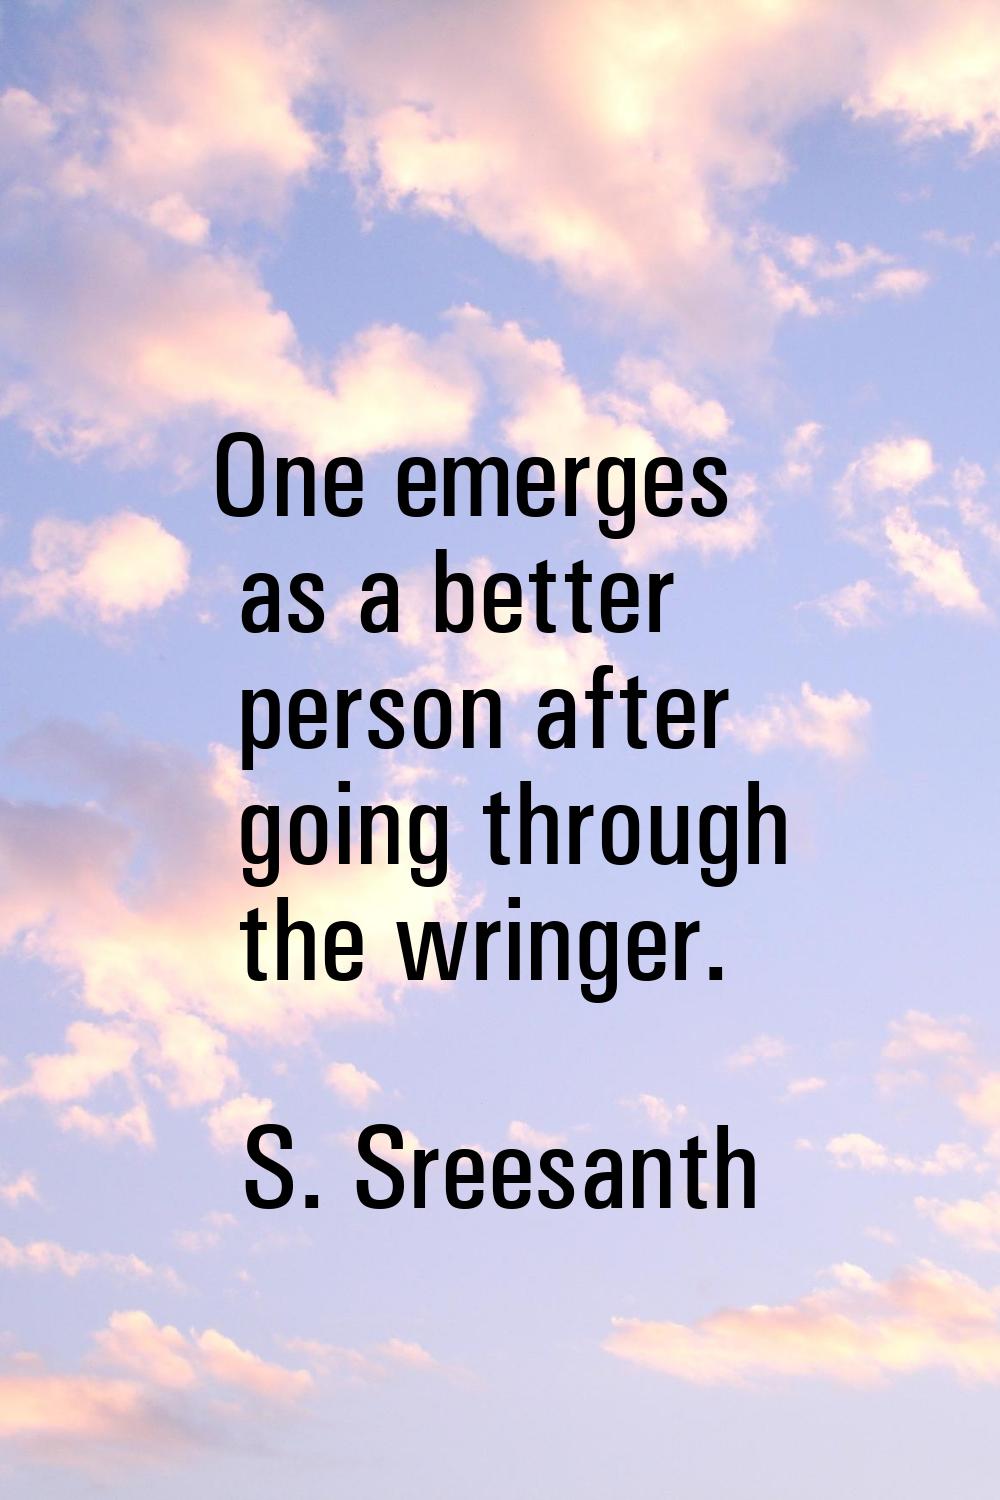 One emerges as a better person after going through the wringer.